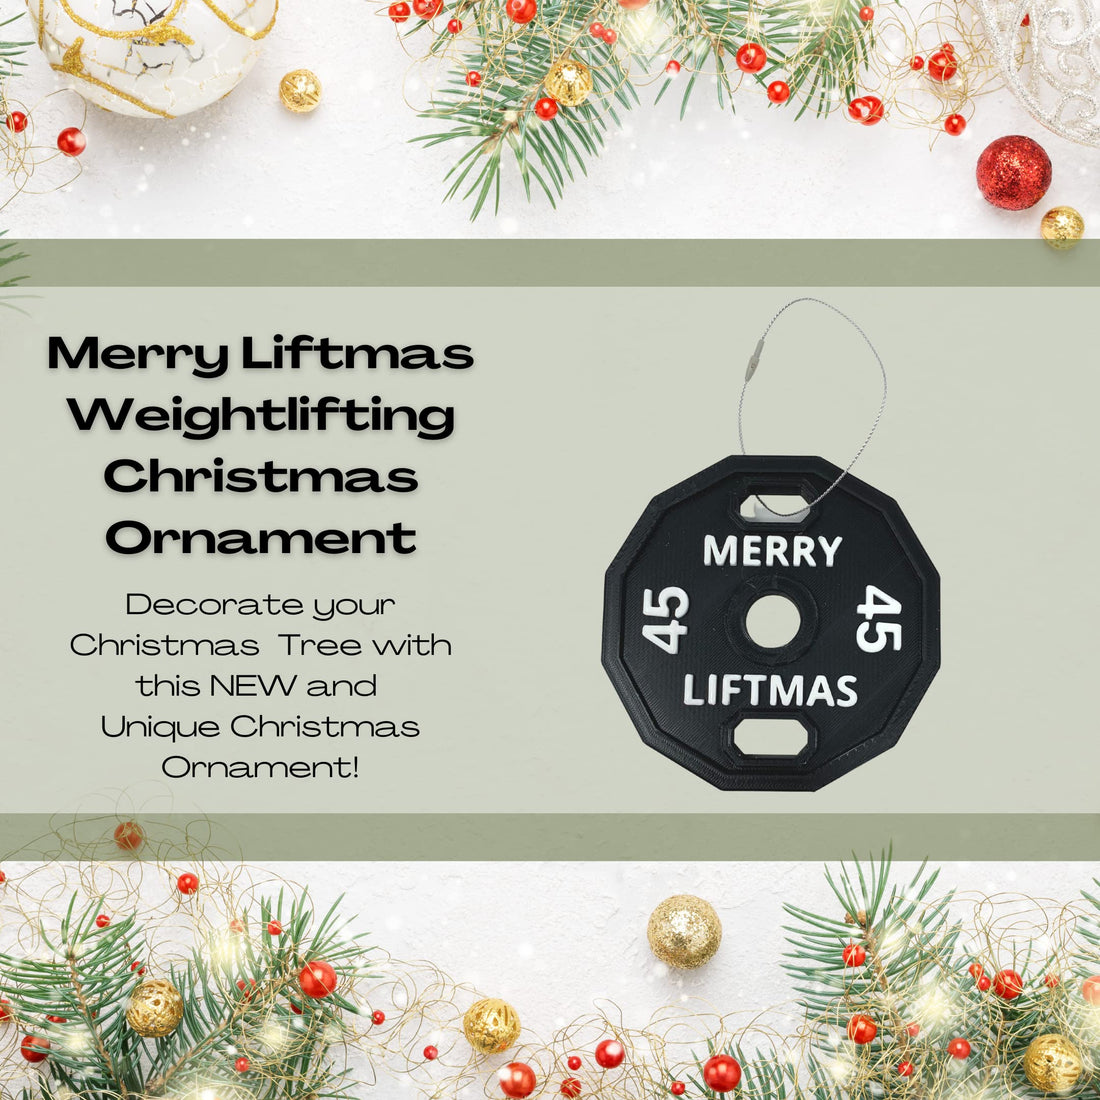 FRESHe Merry Liftmas Bodybuilding Christmas Ornament - Perfect for Weightlifters - Decorative Holiday Ornament - Made in The USA!